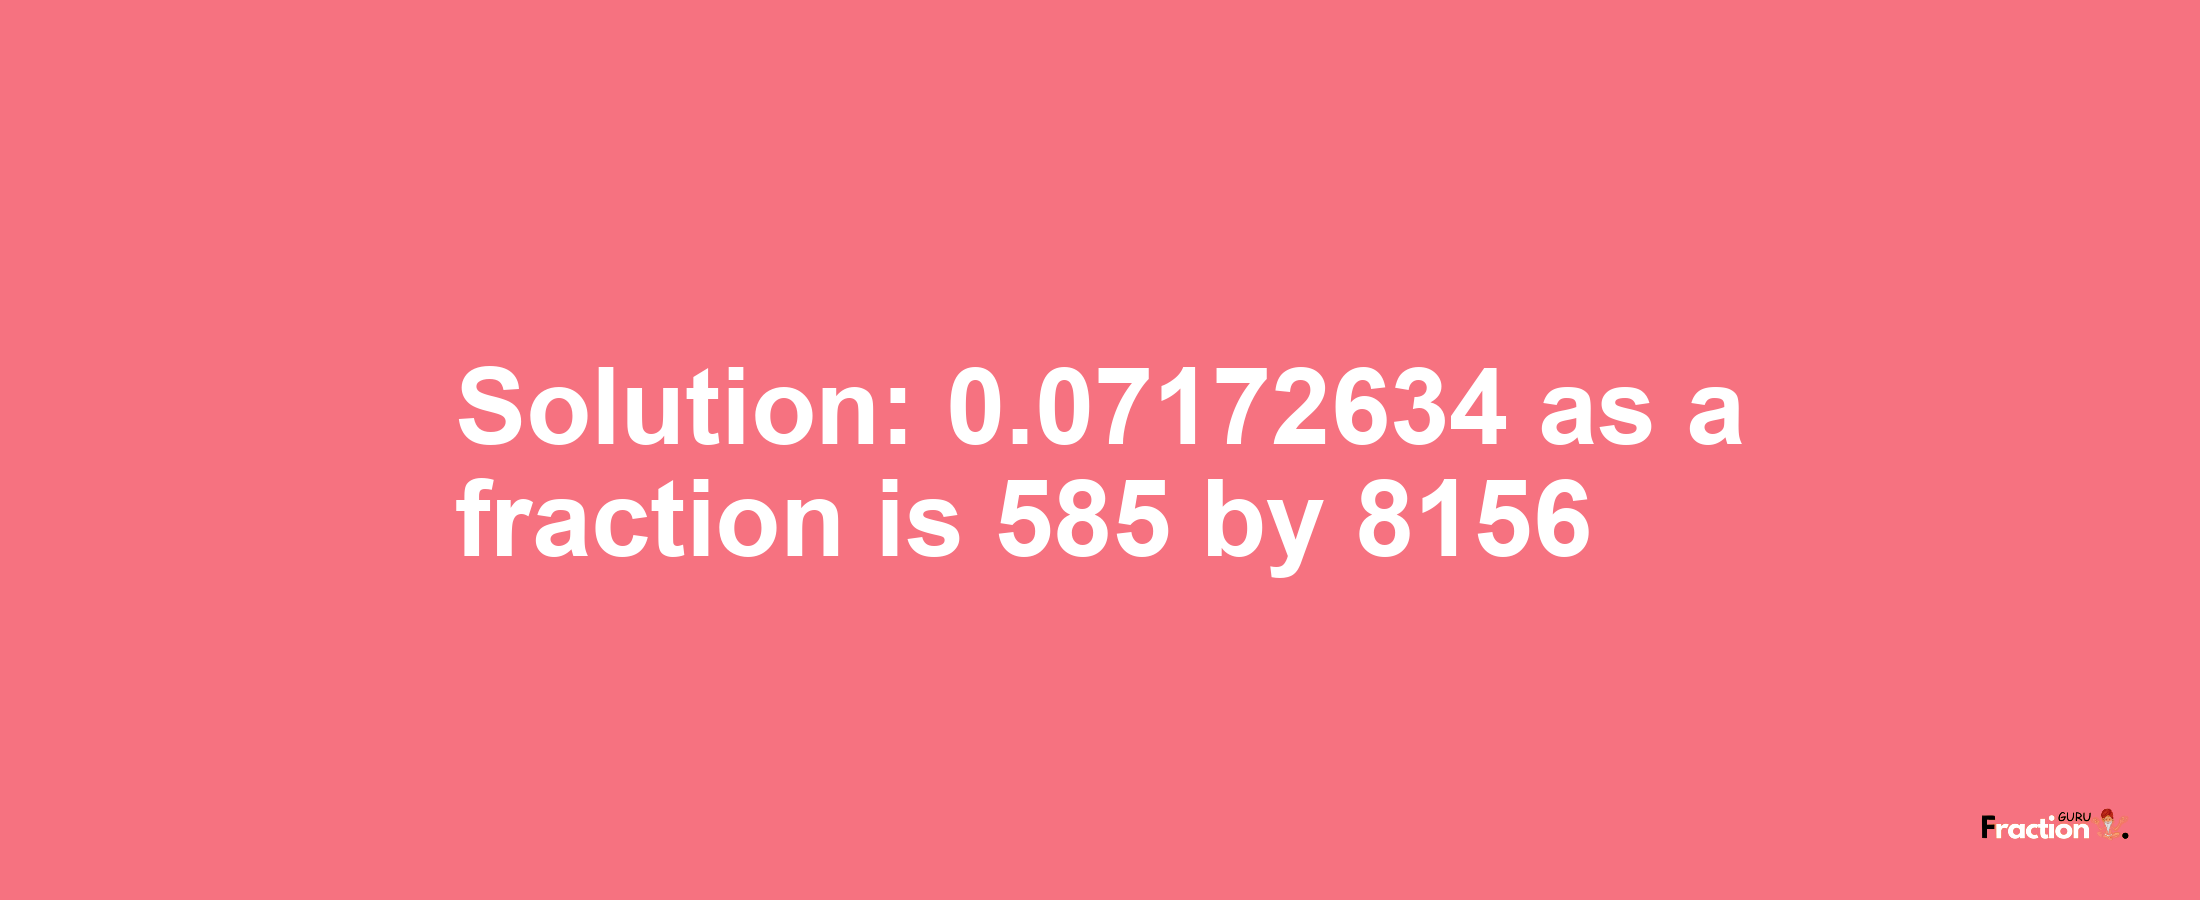 Solution:0.07172634 as a fraction is 585/8156